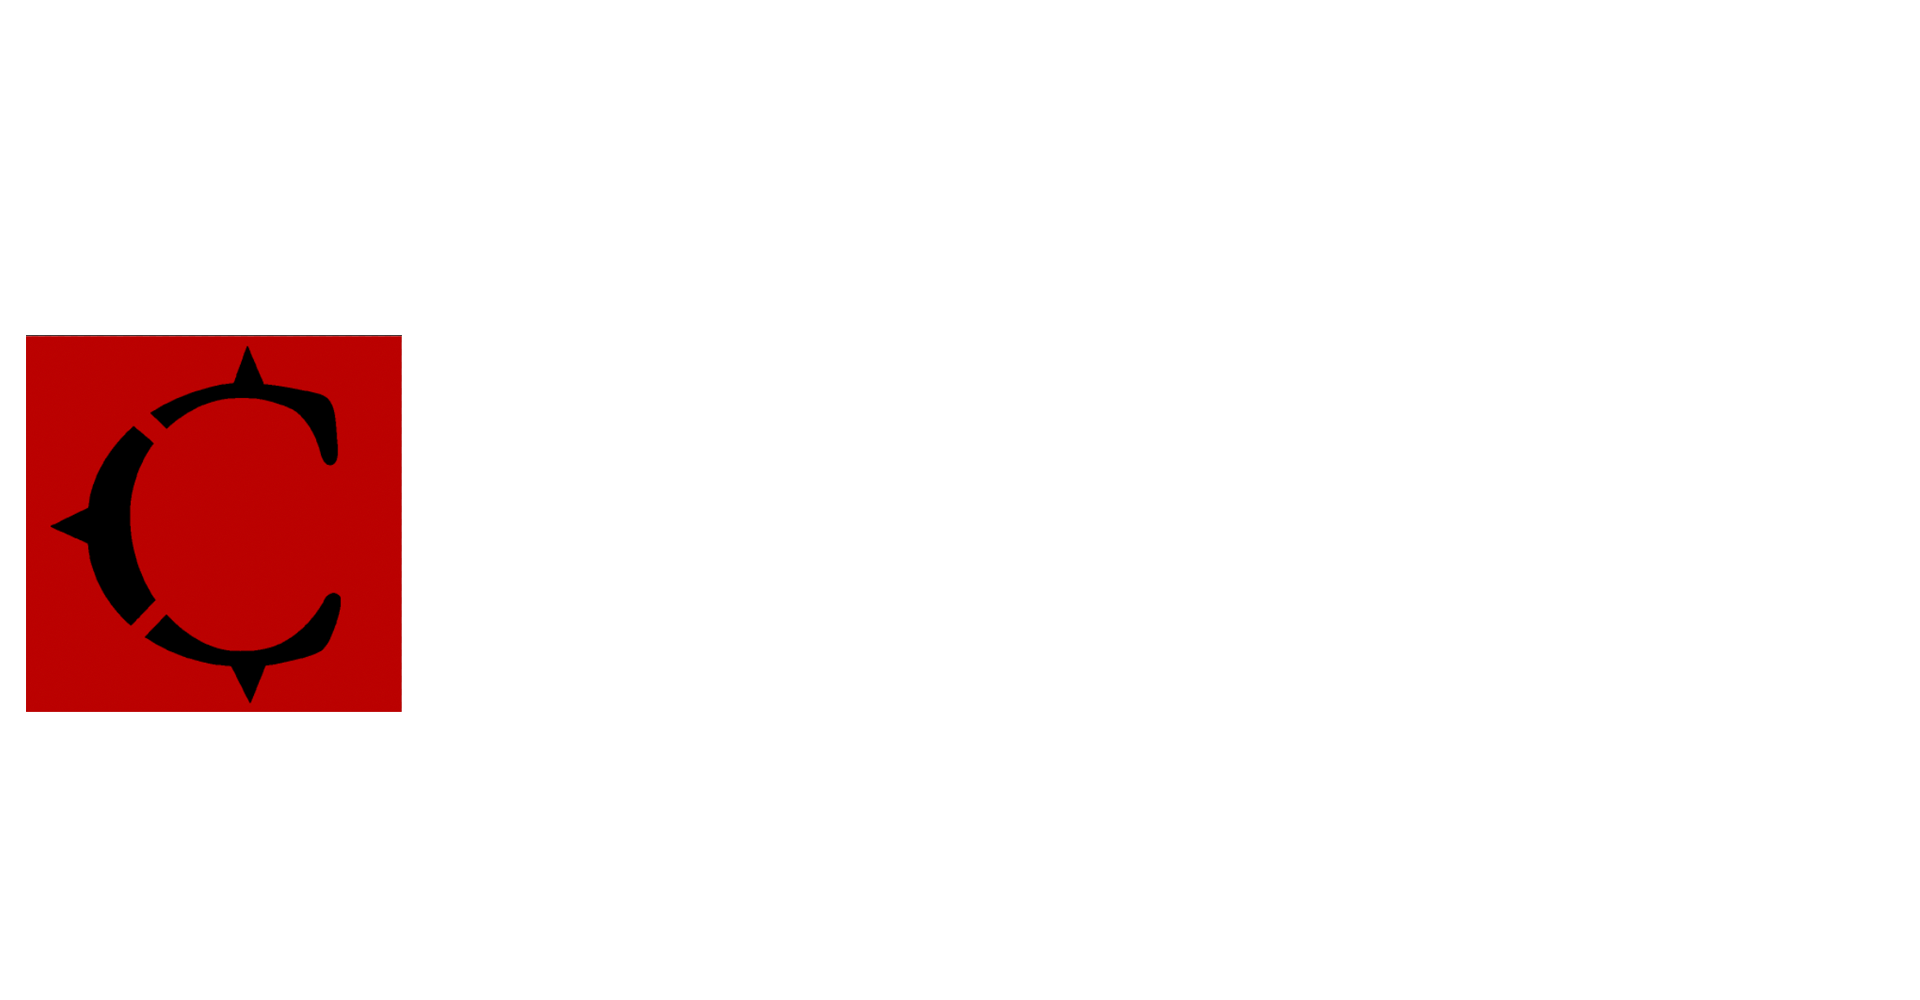 CPTINK